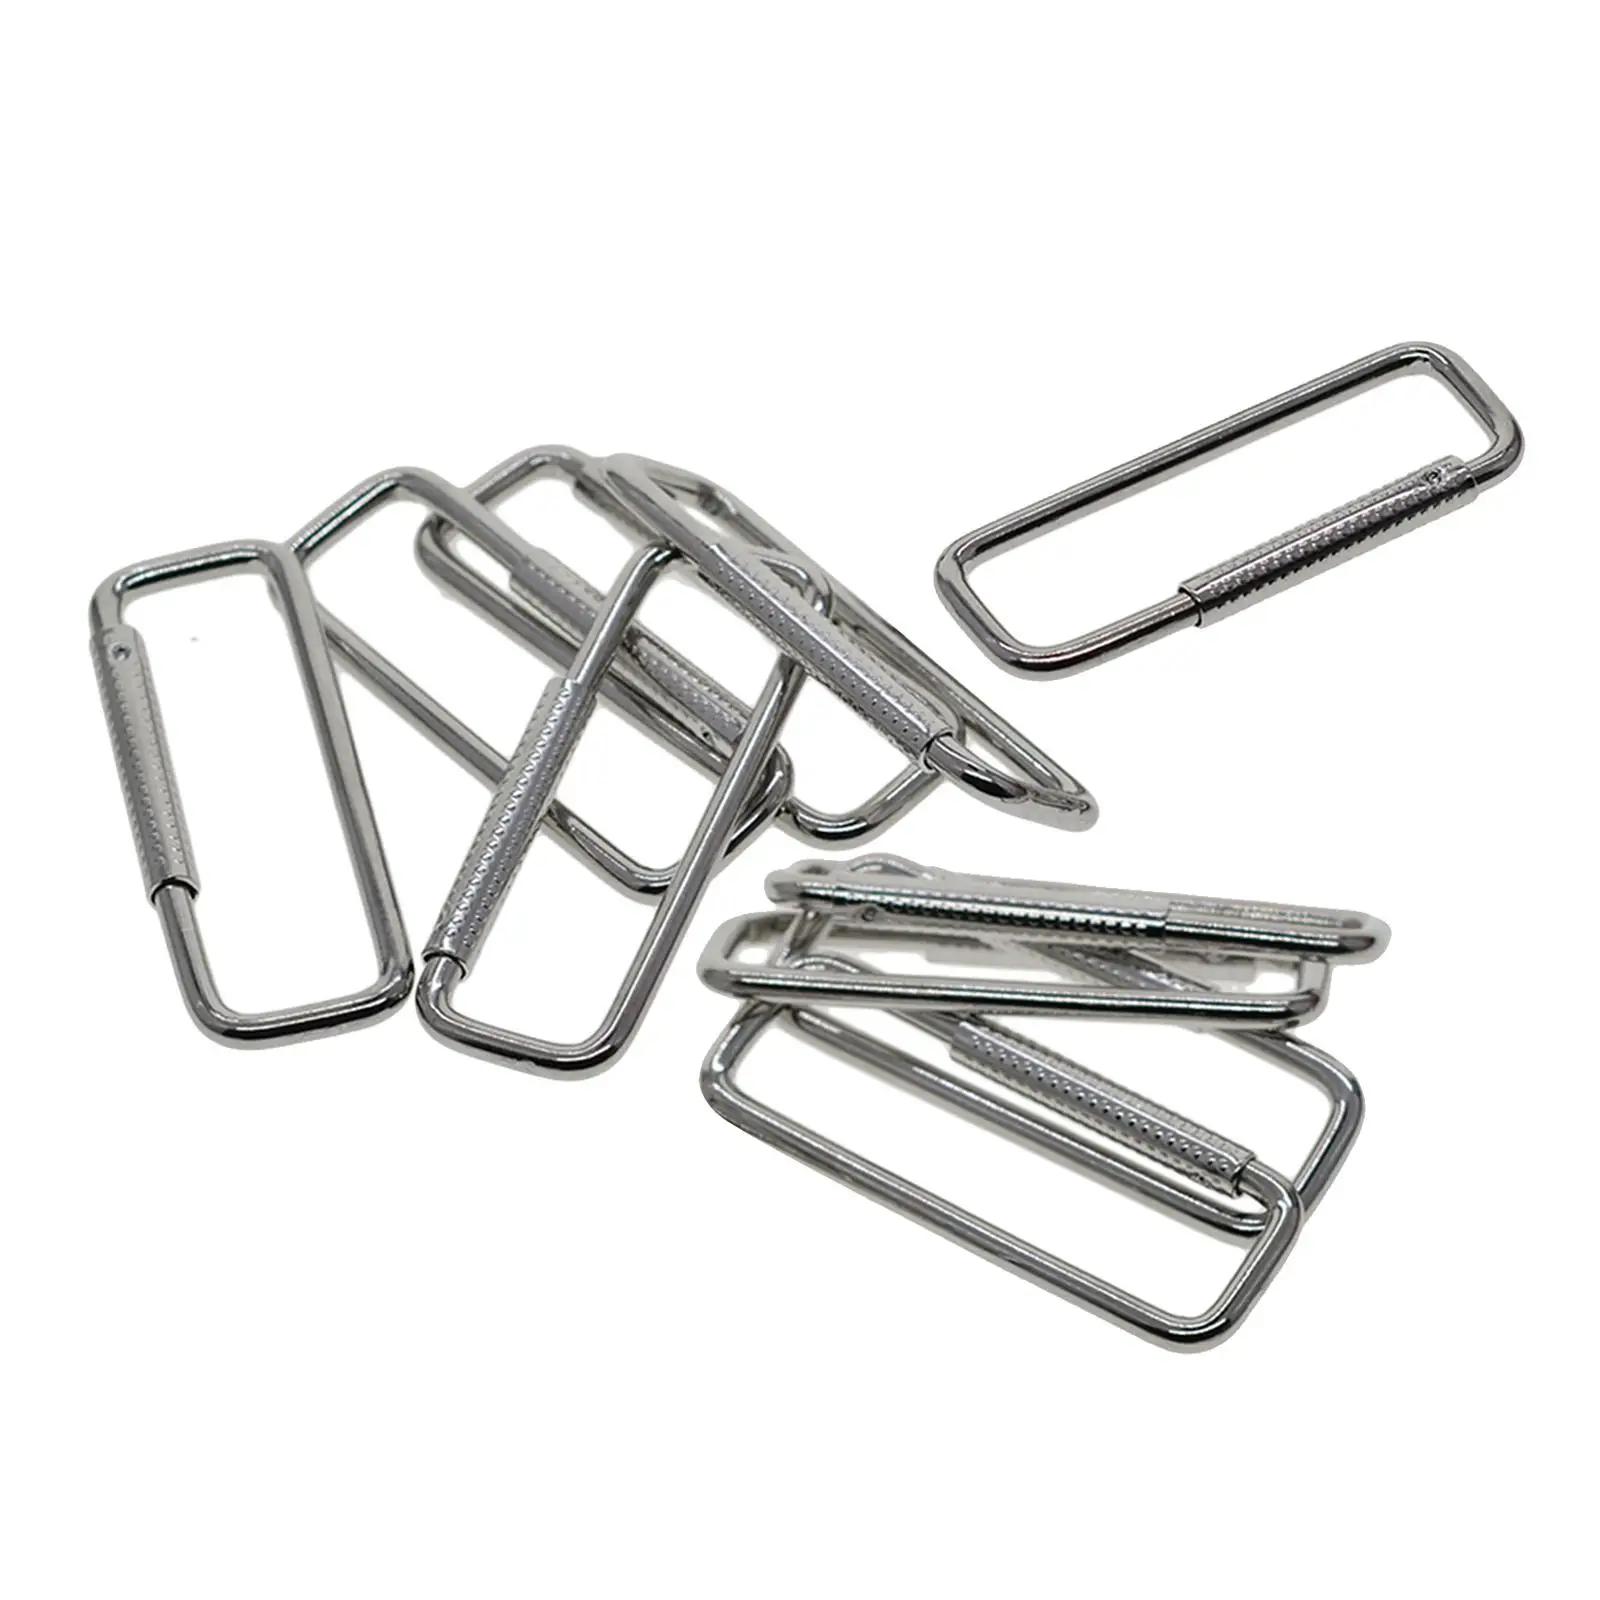 10 Pieces Rectangular Carabiner Clips Durable Sturdy Multifunctional Steel Hook DIY Keychain Clips for Indoor Dog Tags Backpack